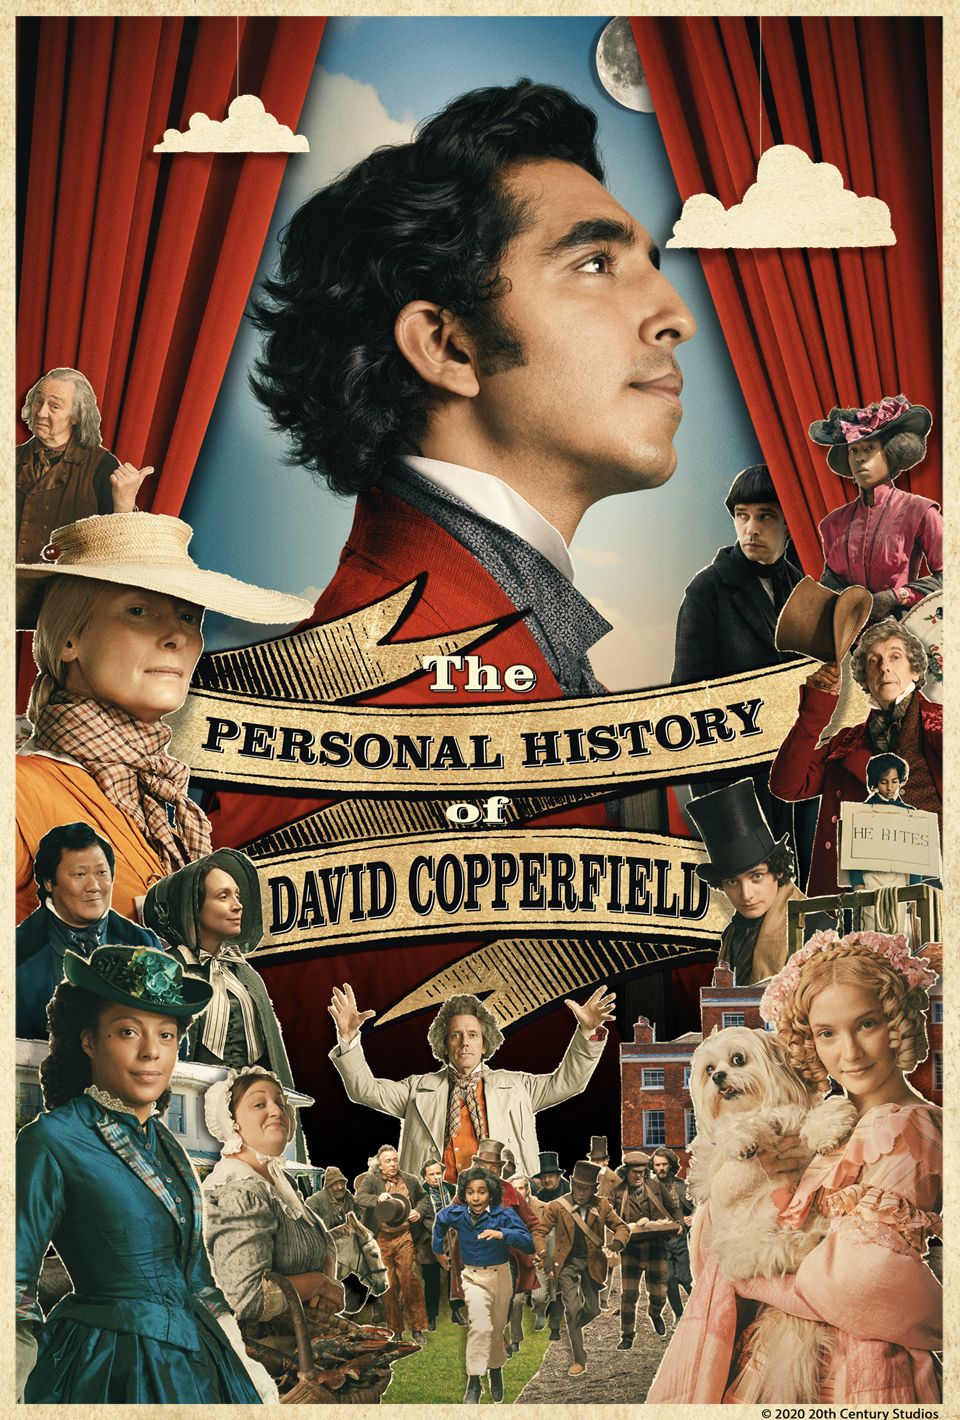 The Personal History Of David Copperfield